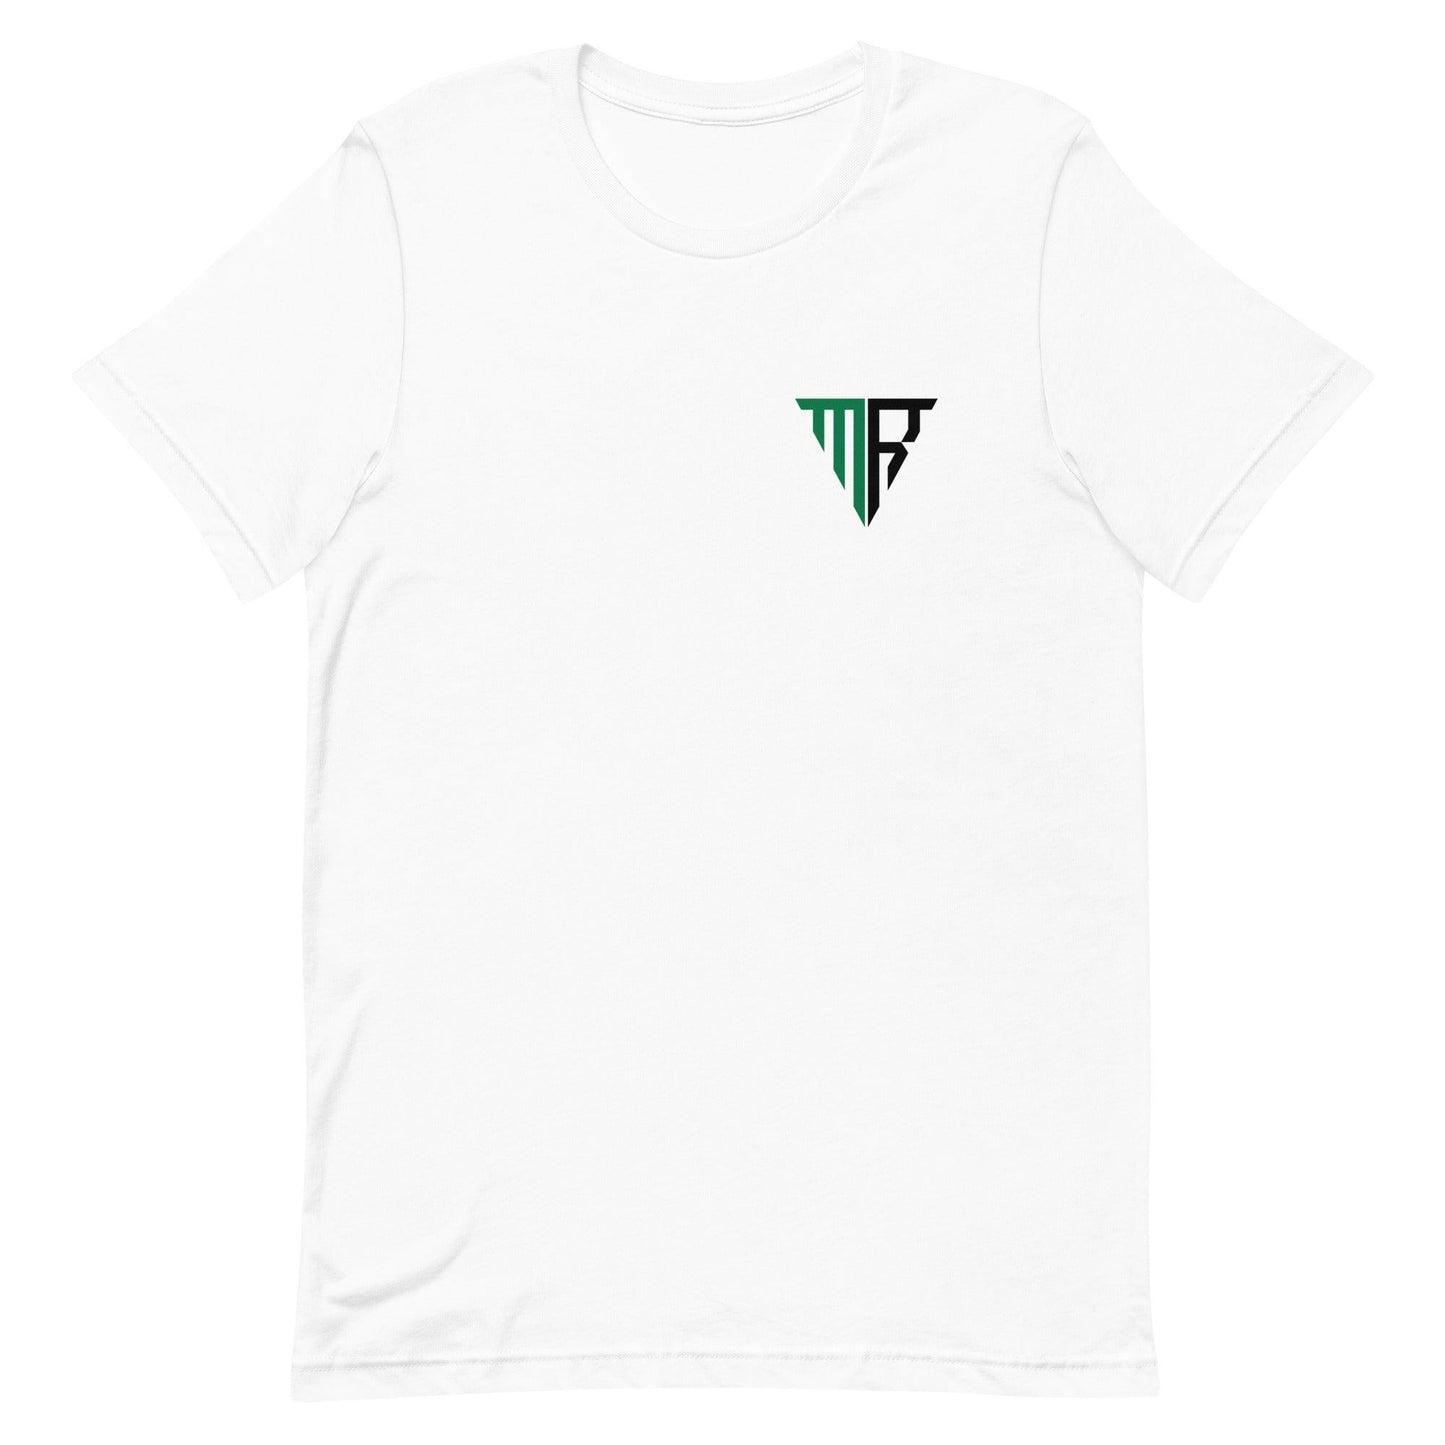 Max Reese "Essential" t-shirt - Fan Arch